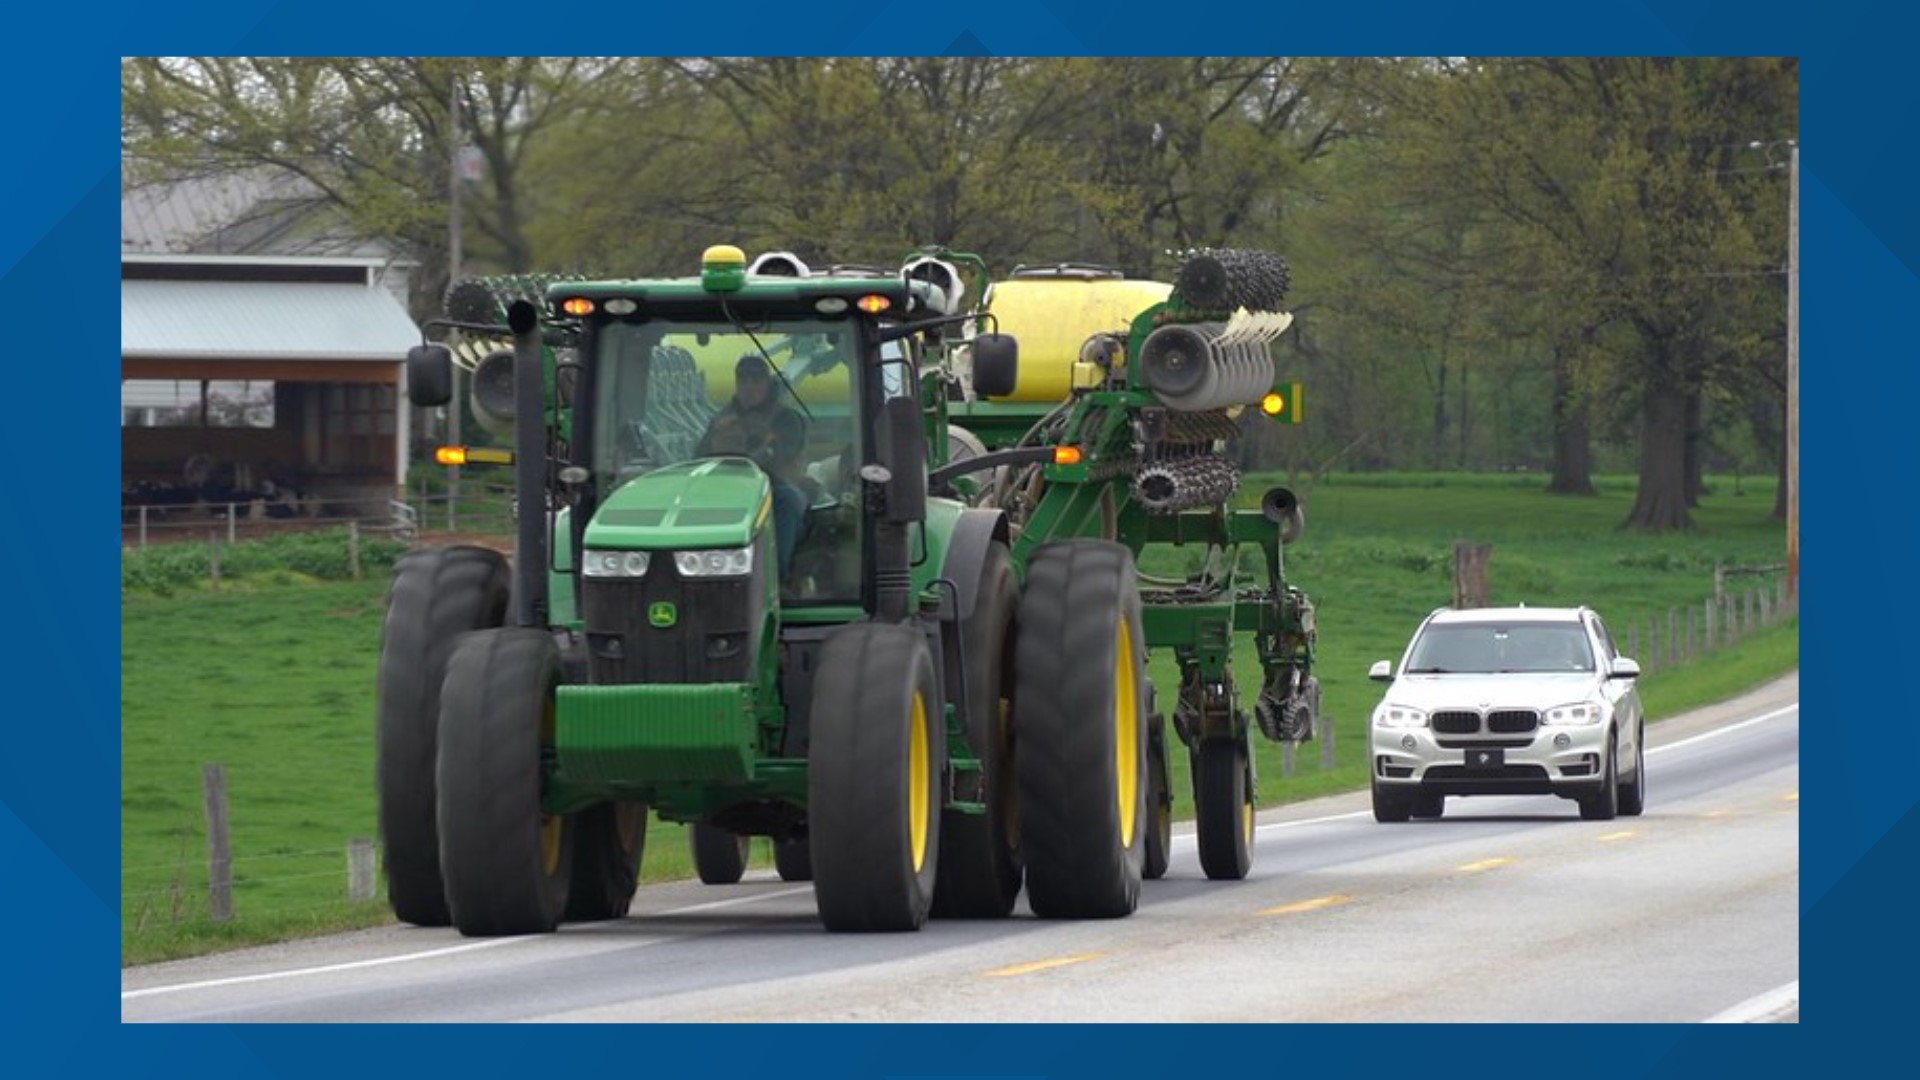 According to PennDOT, there were 112 crashes last year involving farm equipment on rural roads, seven of which were deadly.